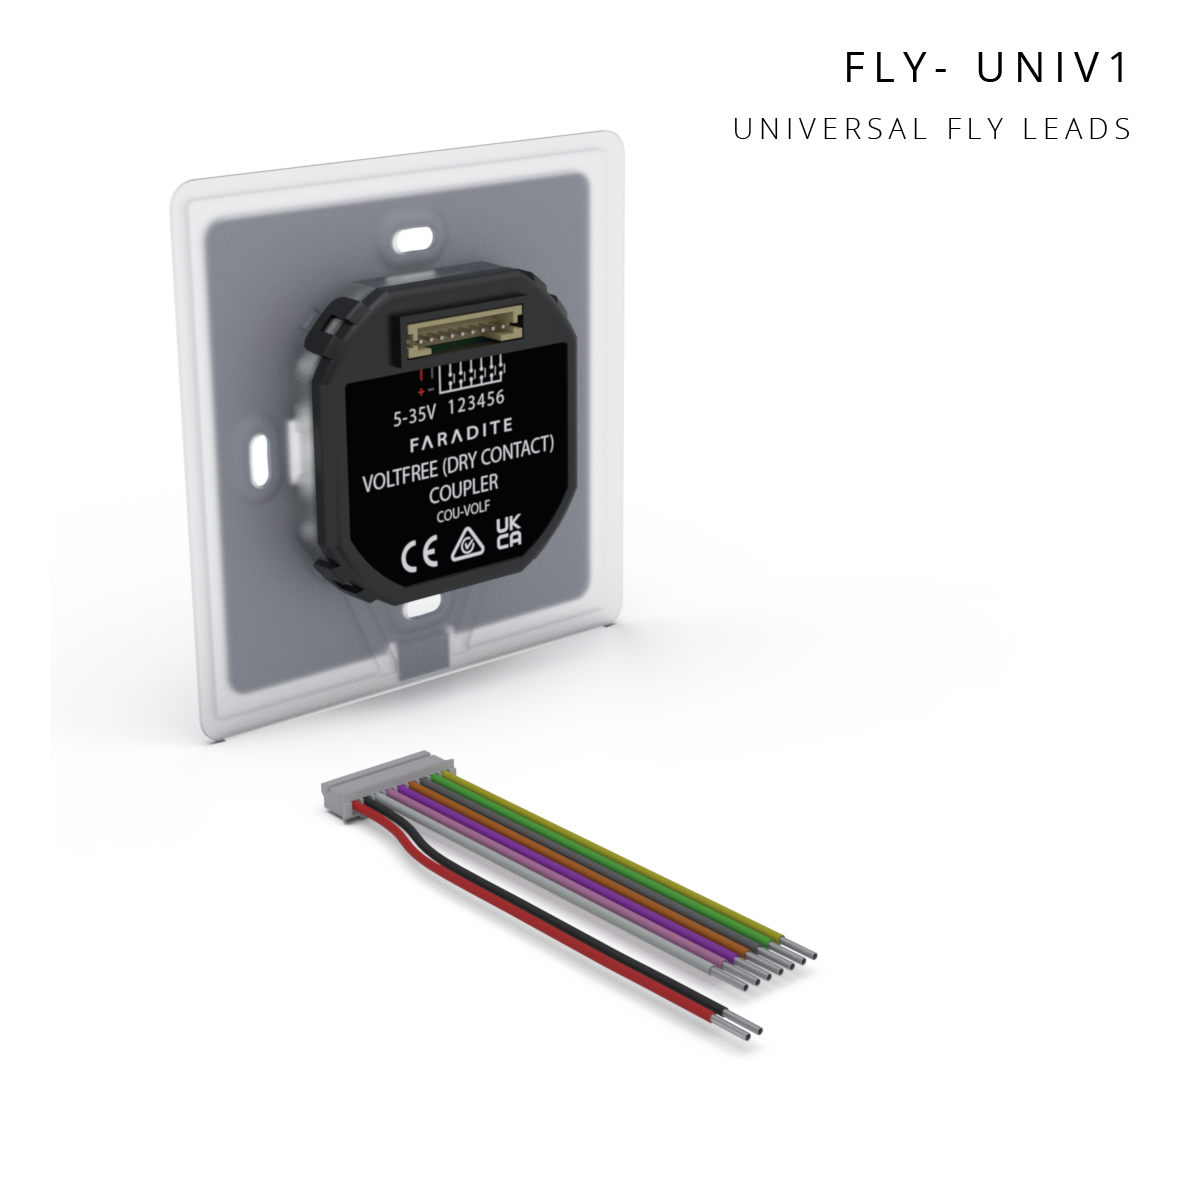 Universal flyleads connected to volt free TAP keypad